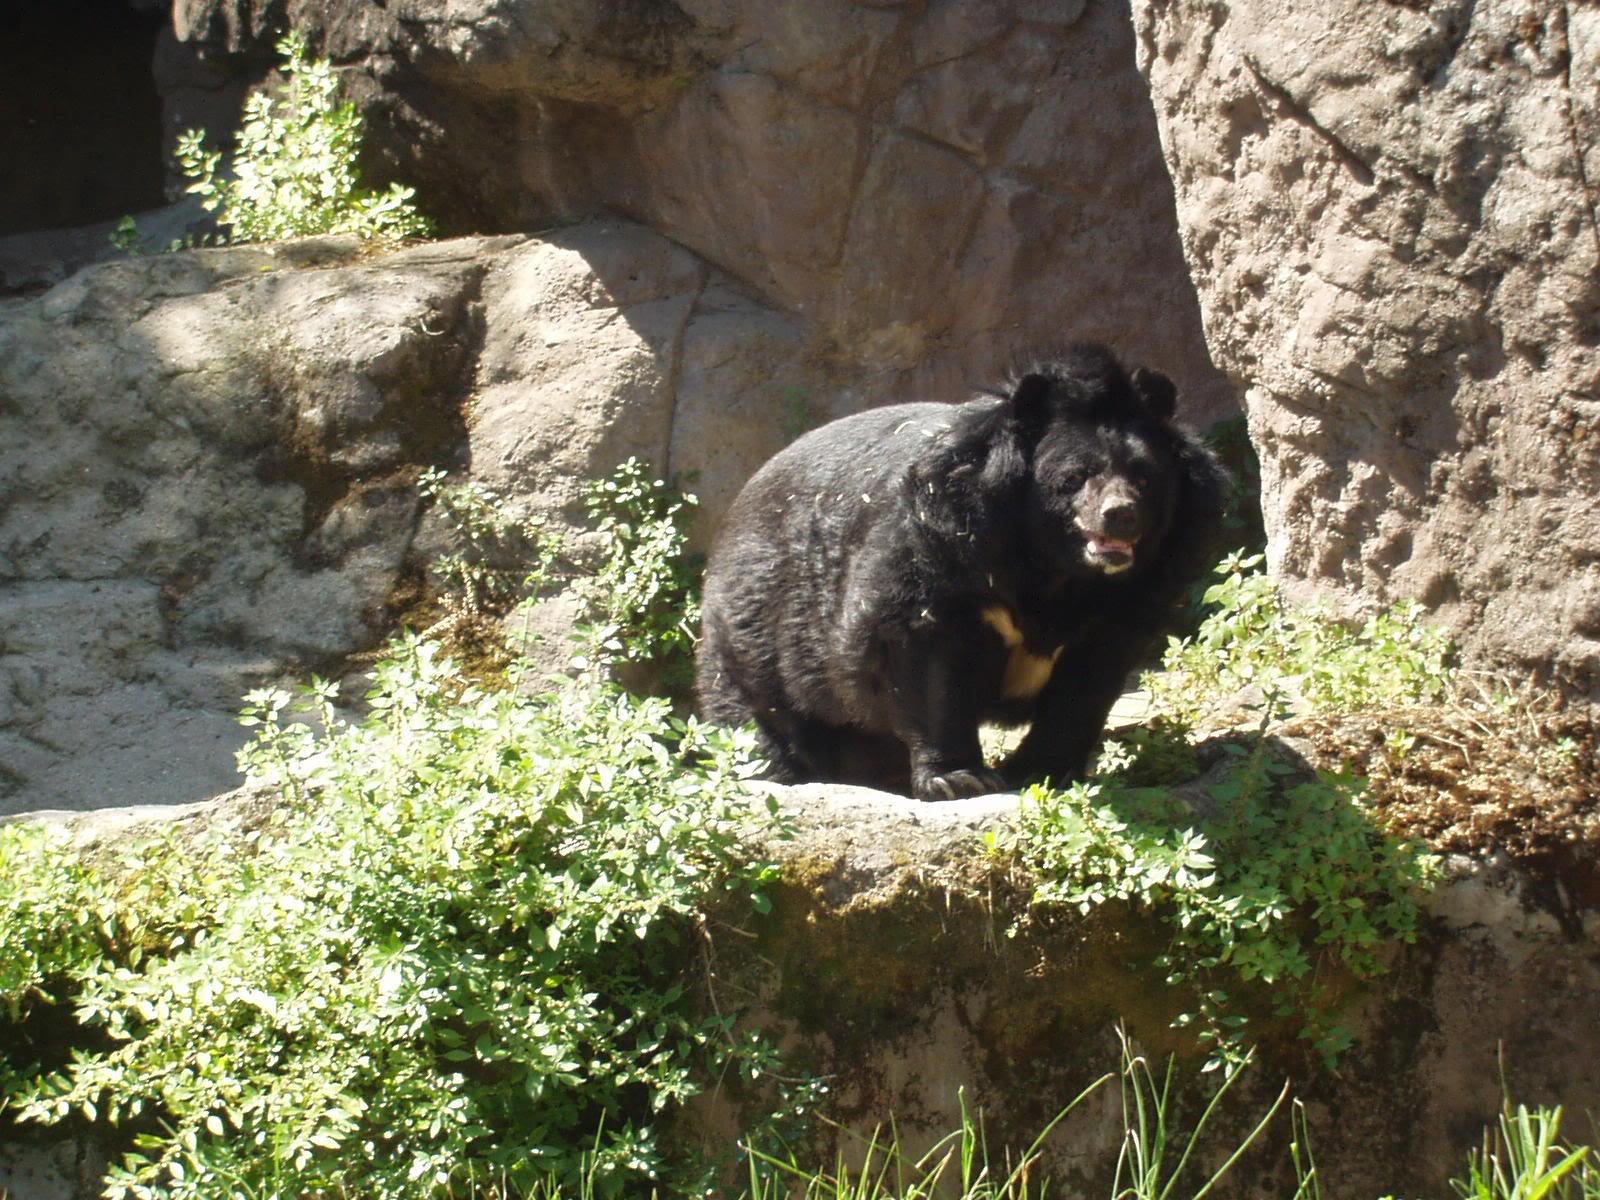 Asian Black Bears are massive and capable fighters